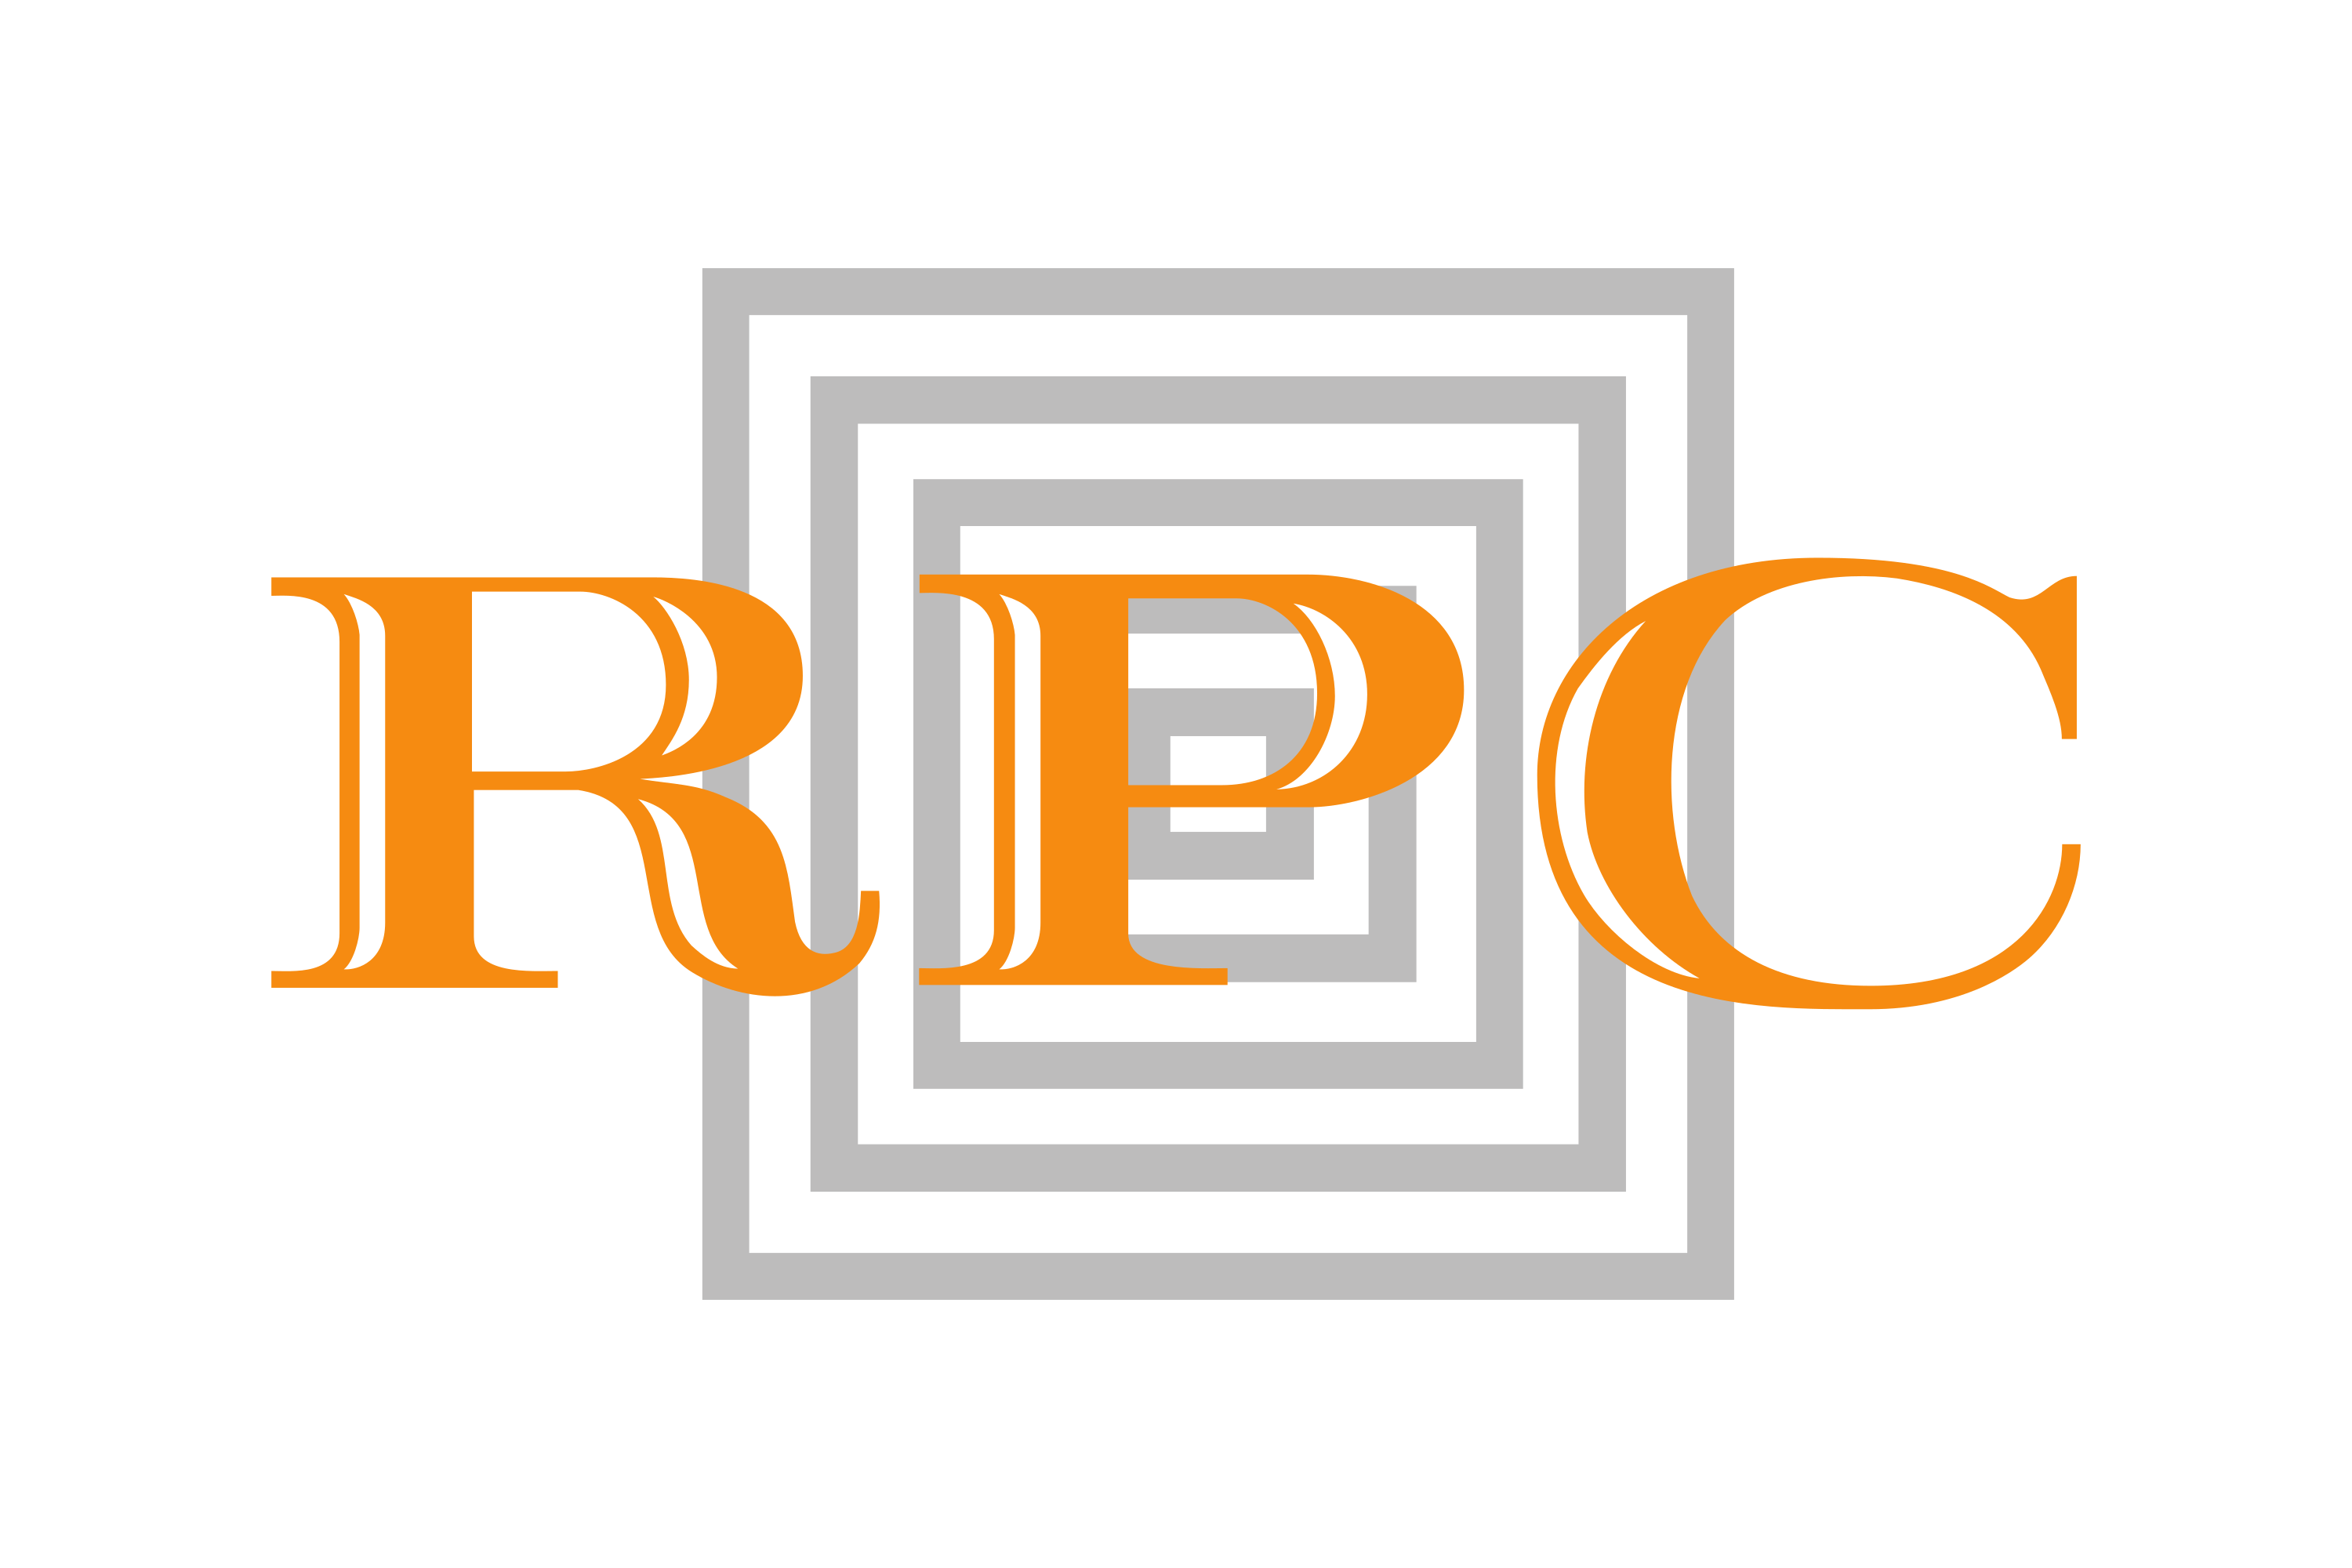 Download RPC Group Logo in SVG Vector or PNG File Format - Logo.wine